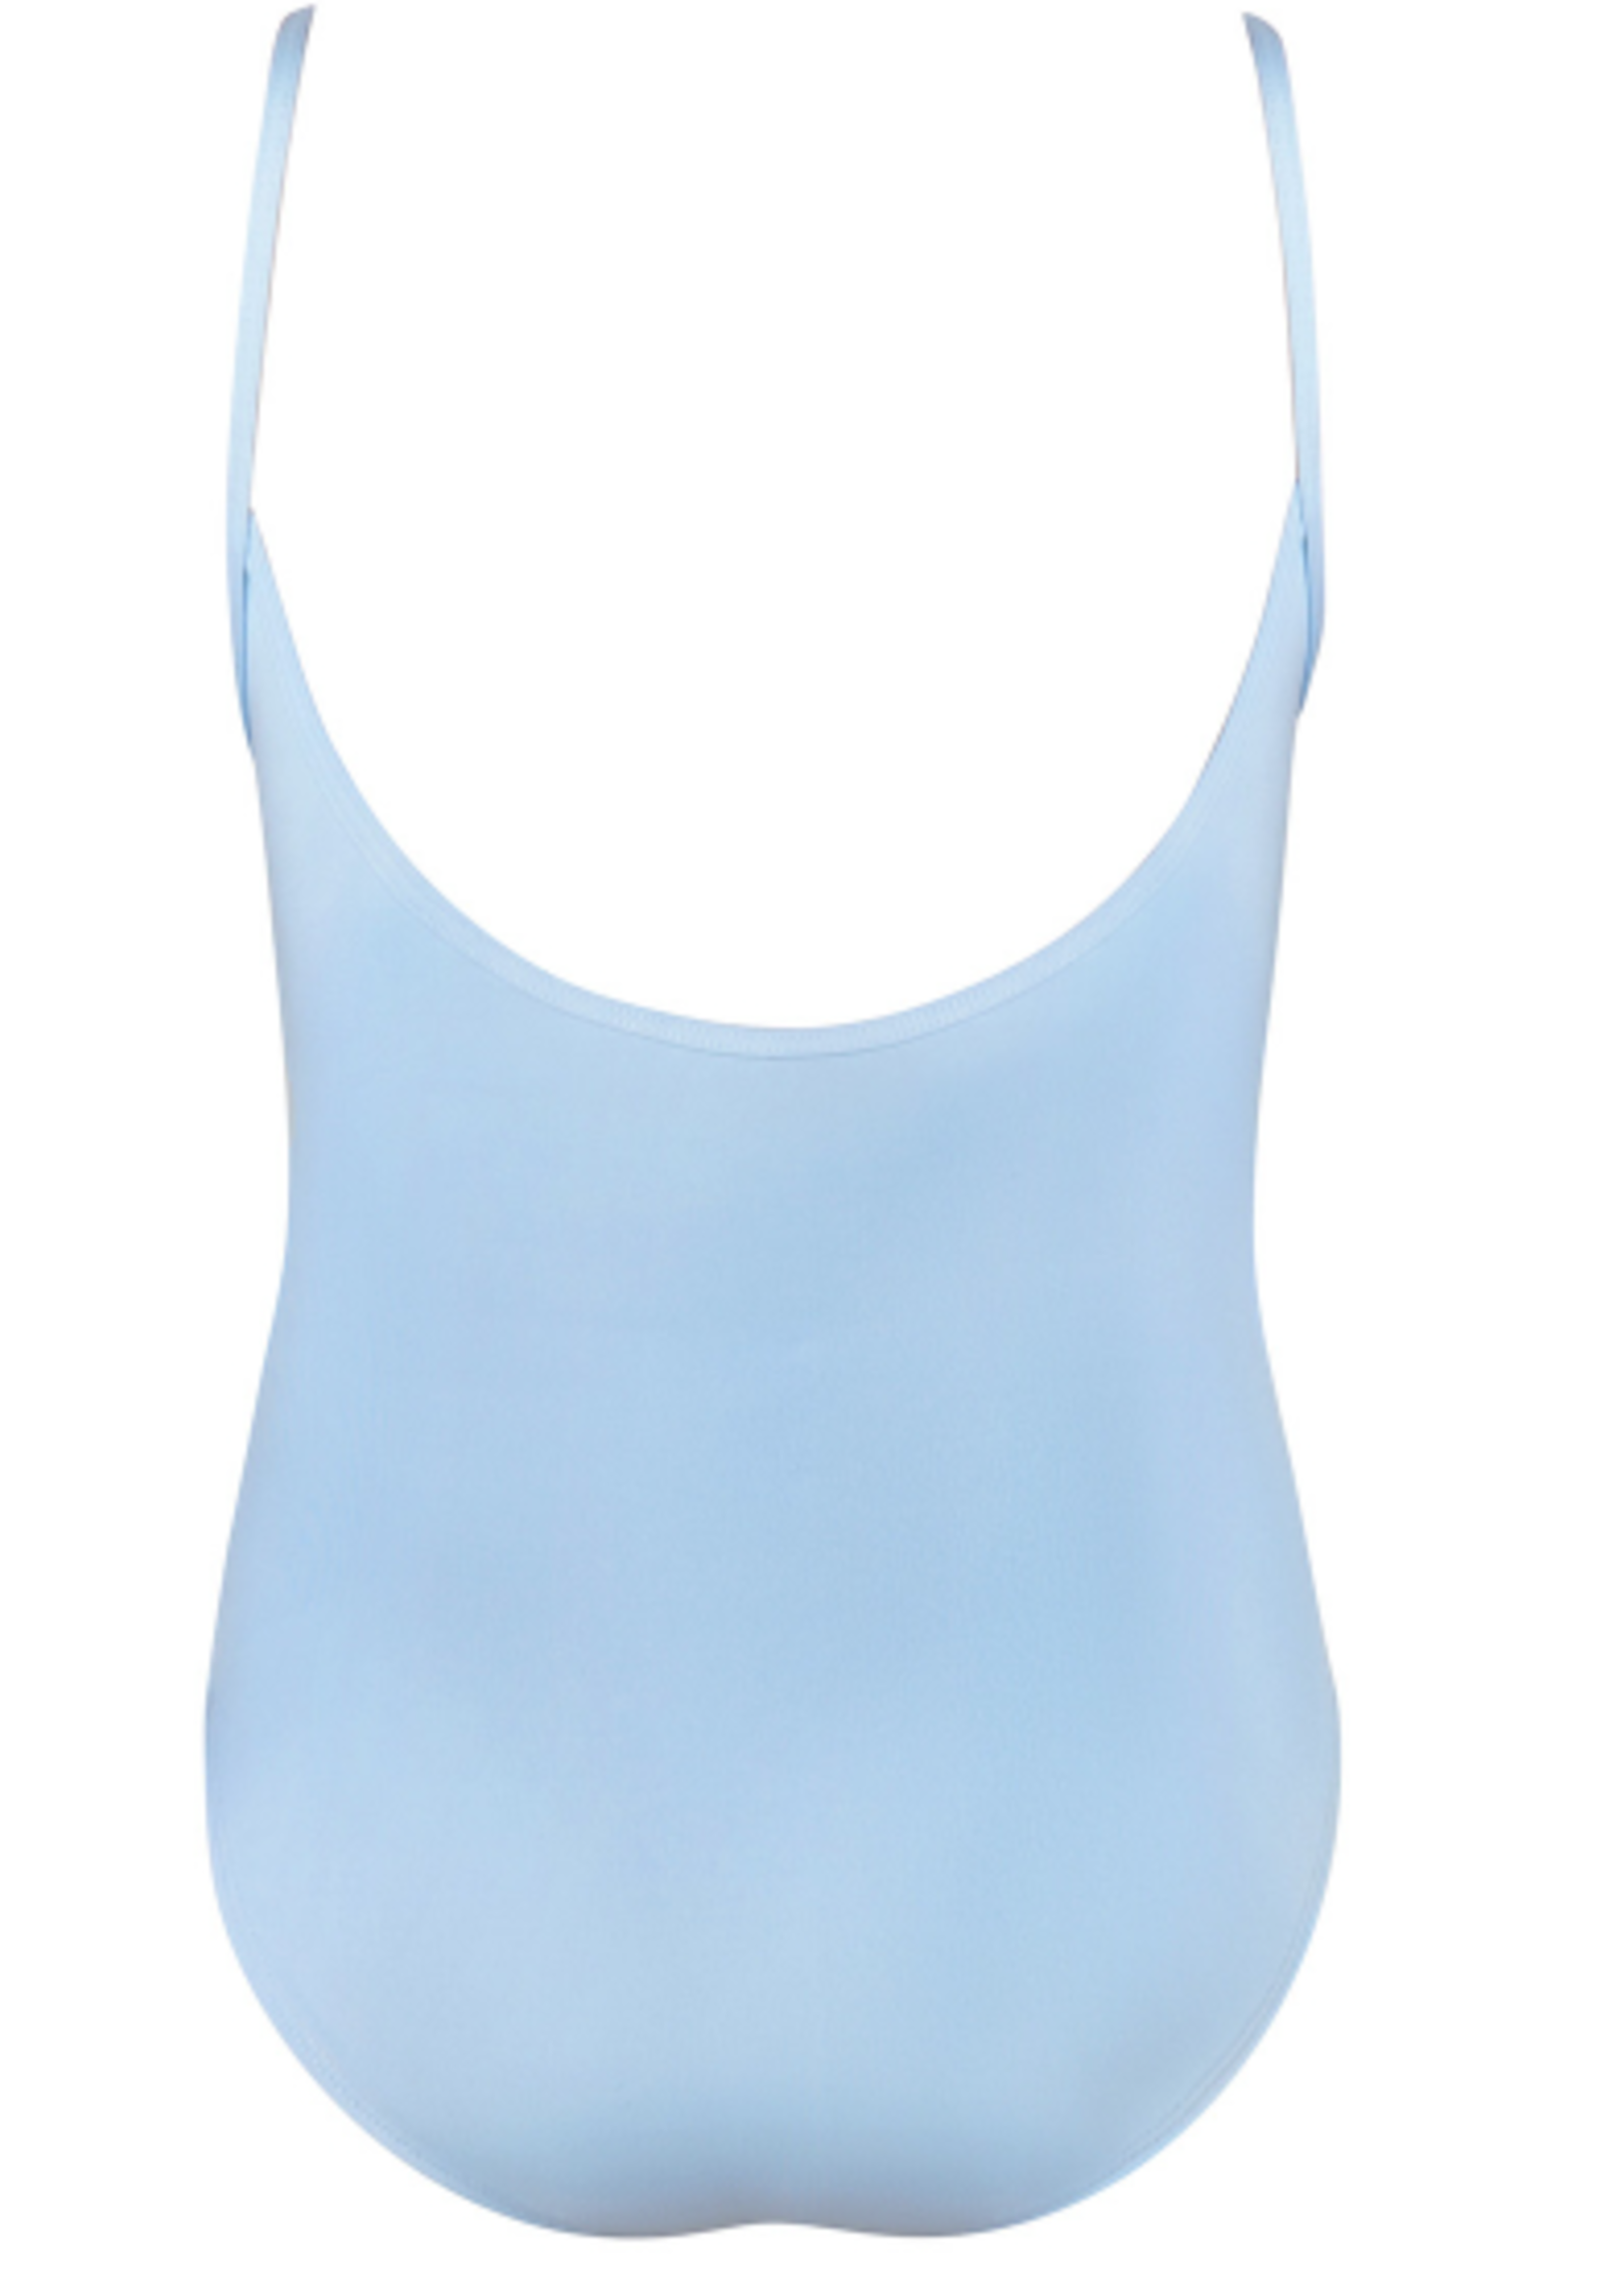 ENERGETIKS ICL630D4 NATALIA PINCHED FRONT PRINCESS SEAM CAMISOLE LEOTARD